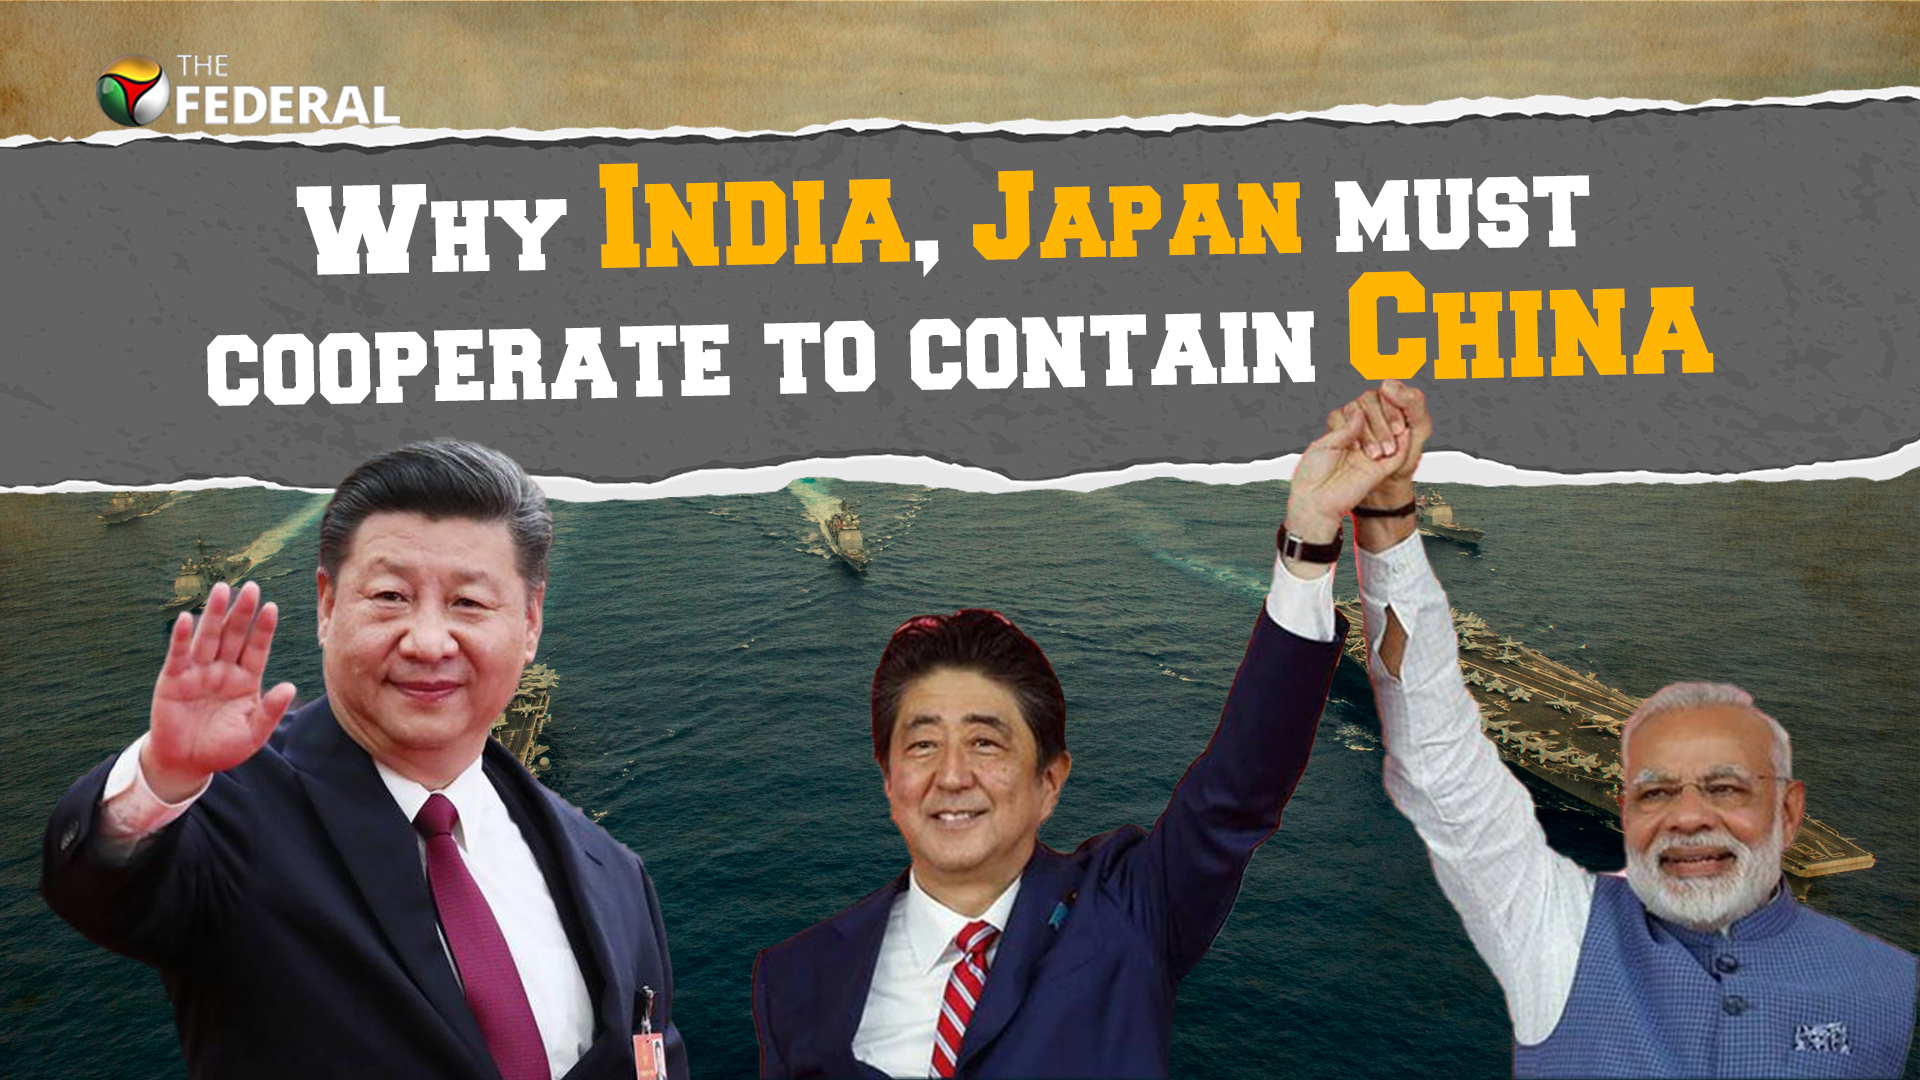 Why India, Japan must cooperate to contain China